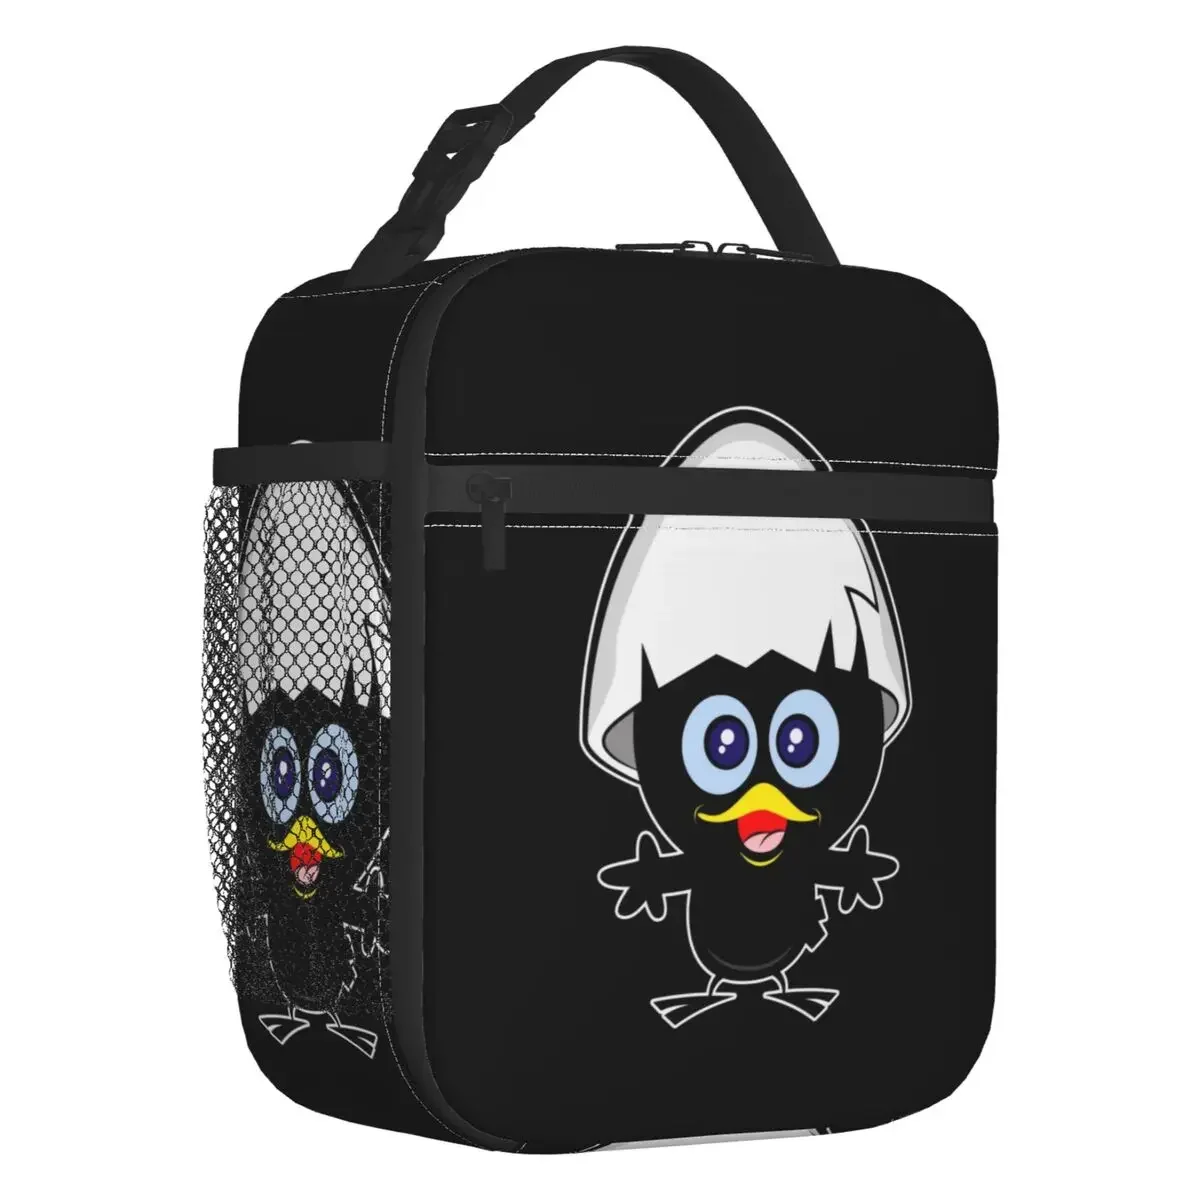 

Calimero Black Chicken Insulated Lunch Tote Bag for Women Cartoon Comic Portable Cooler Thermal Food Lunch Box Work Travel